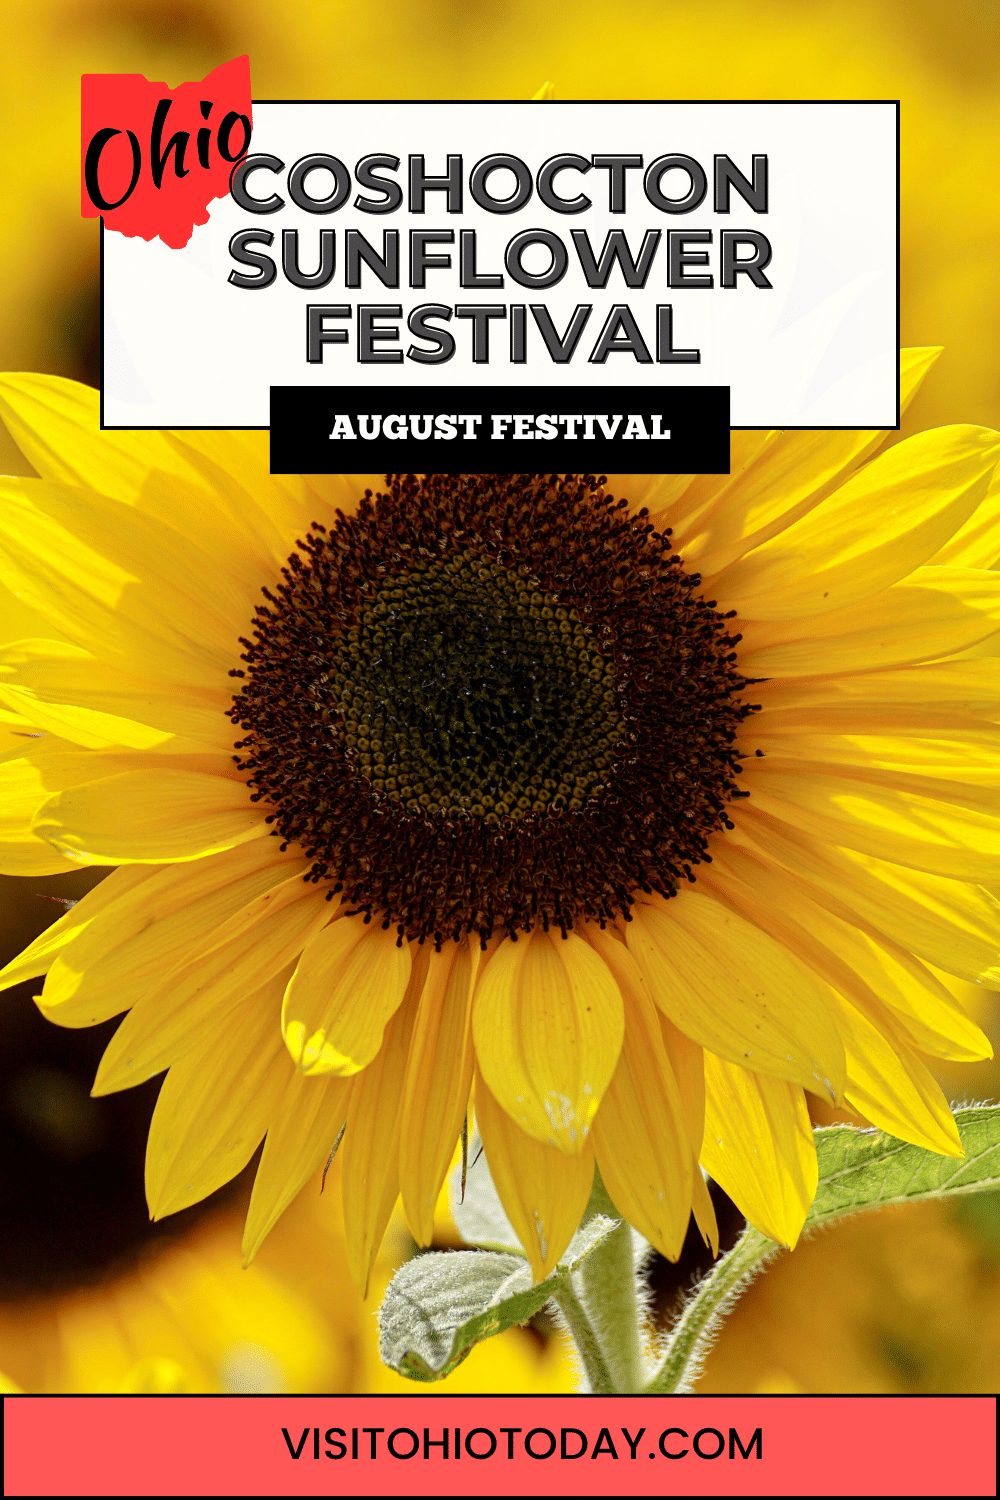 Coshocton Sunflower Festival is an annual summer event occurring at the Coshocton KOA Holiday Campground in Coshocton in early August.